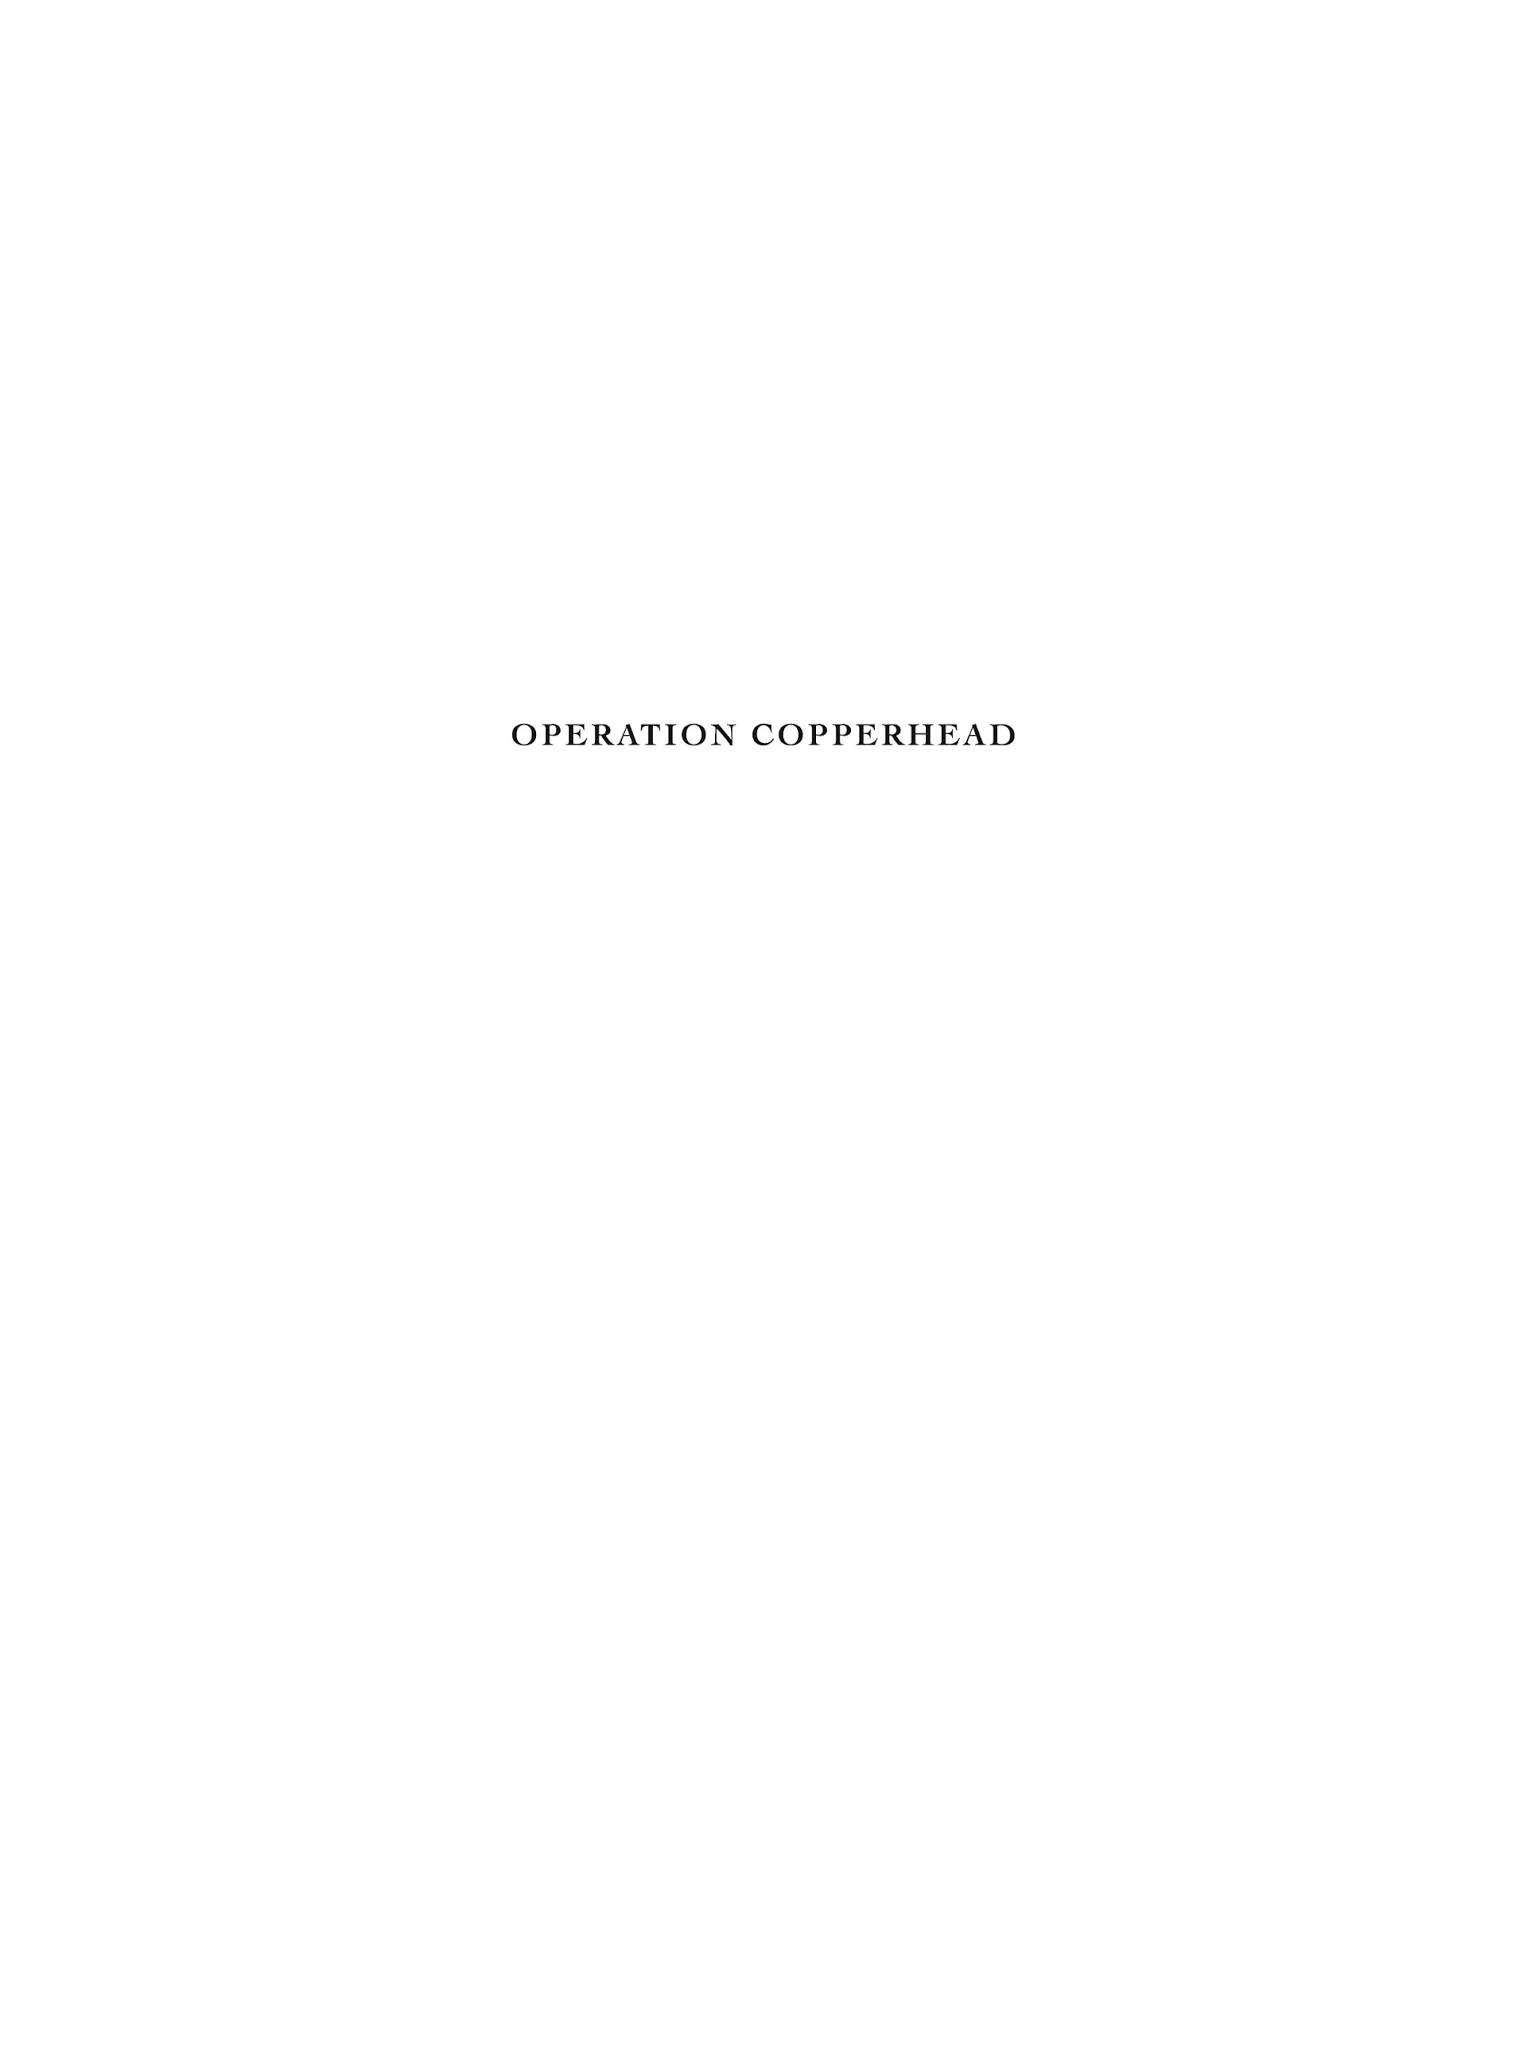 Read online Operation Copperhead comic -  Issue #3 - 2